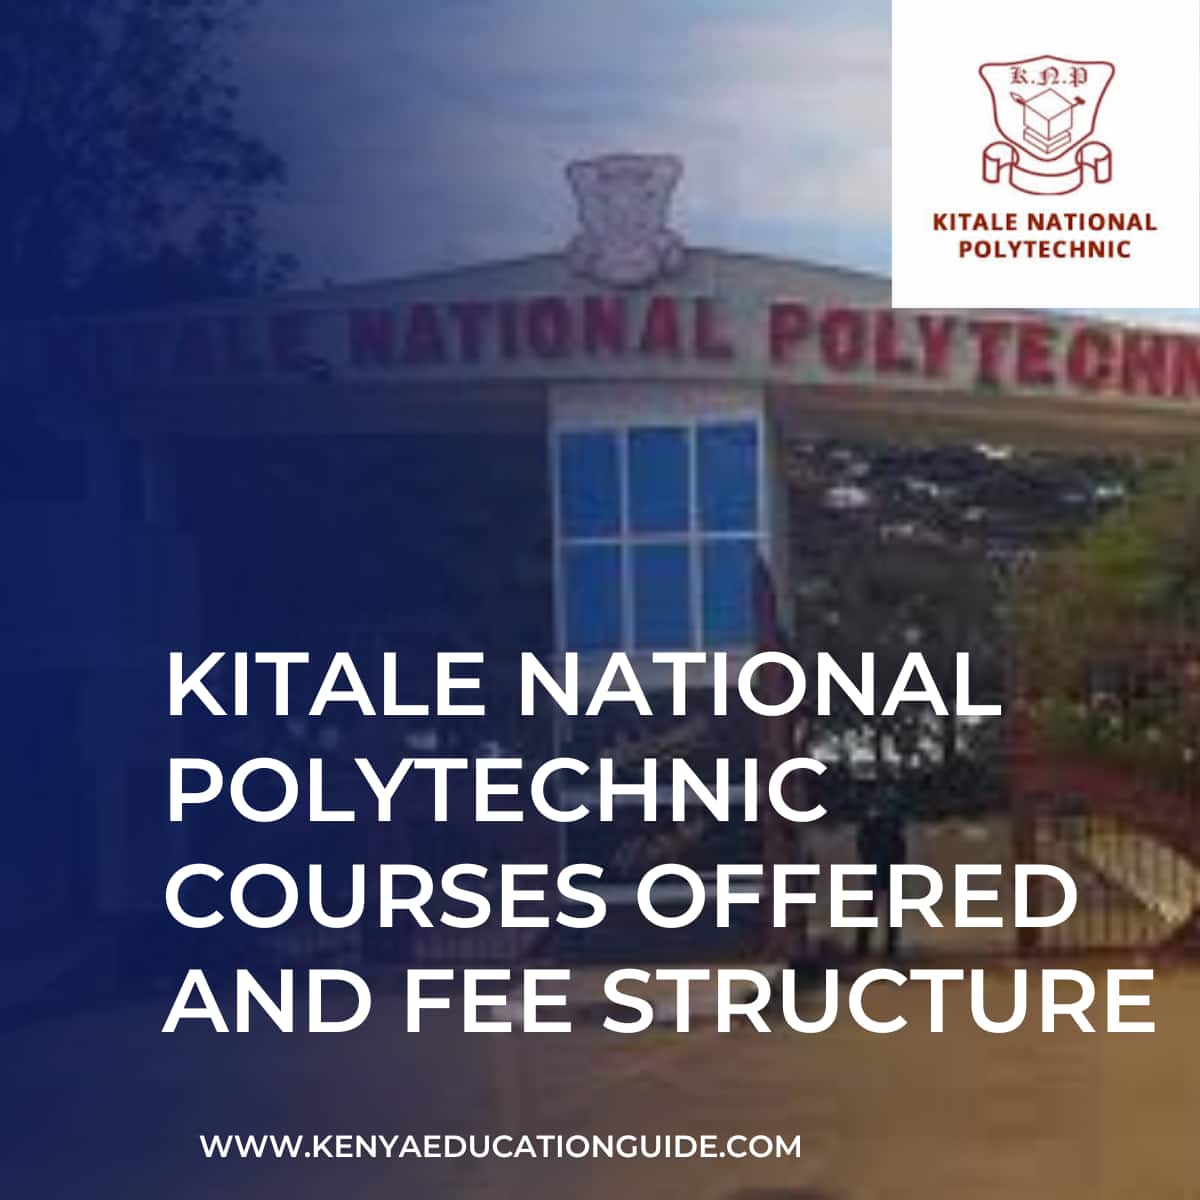 Kitale National Polytechnic Courses Offered and Fee Structure